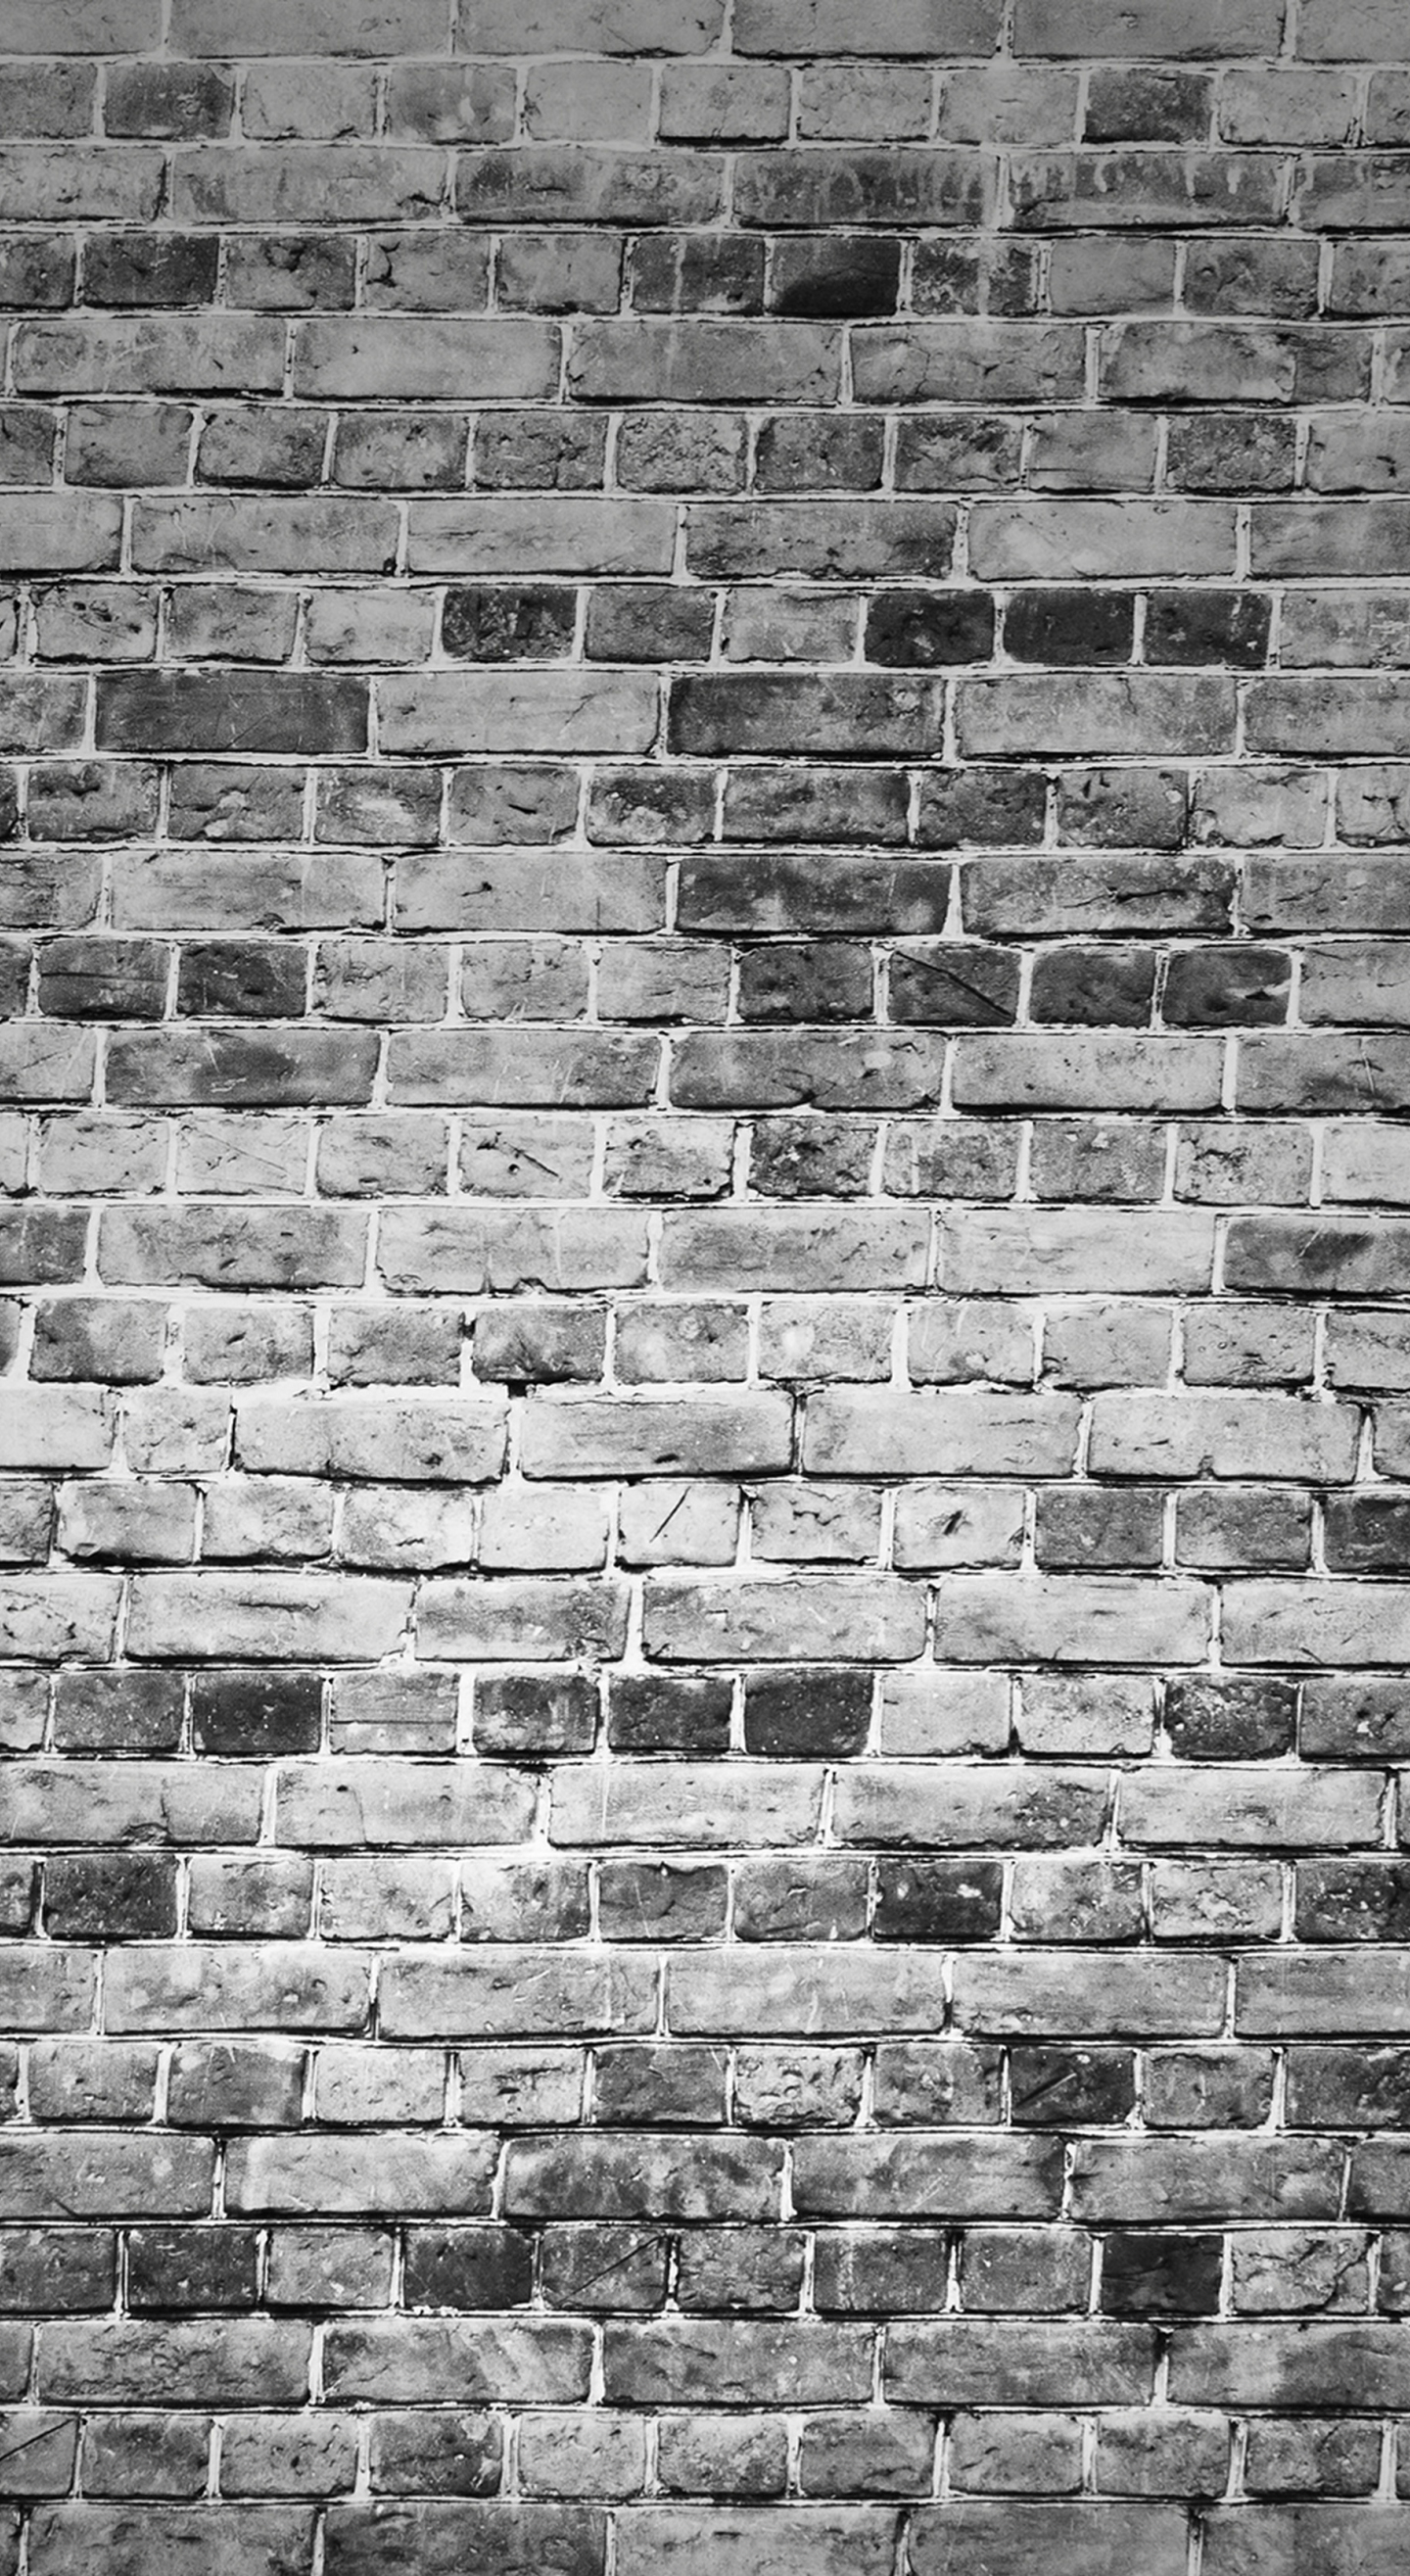 Download 1440x2630 Wallpaper Brick Wall Black And White